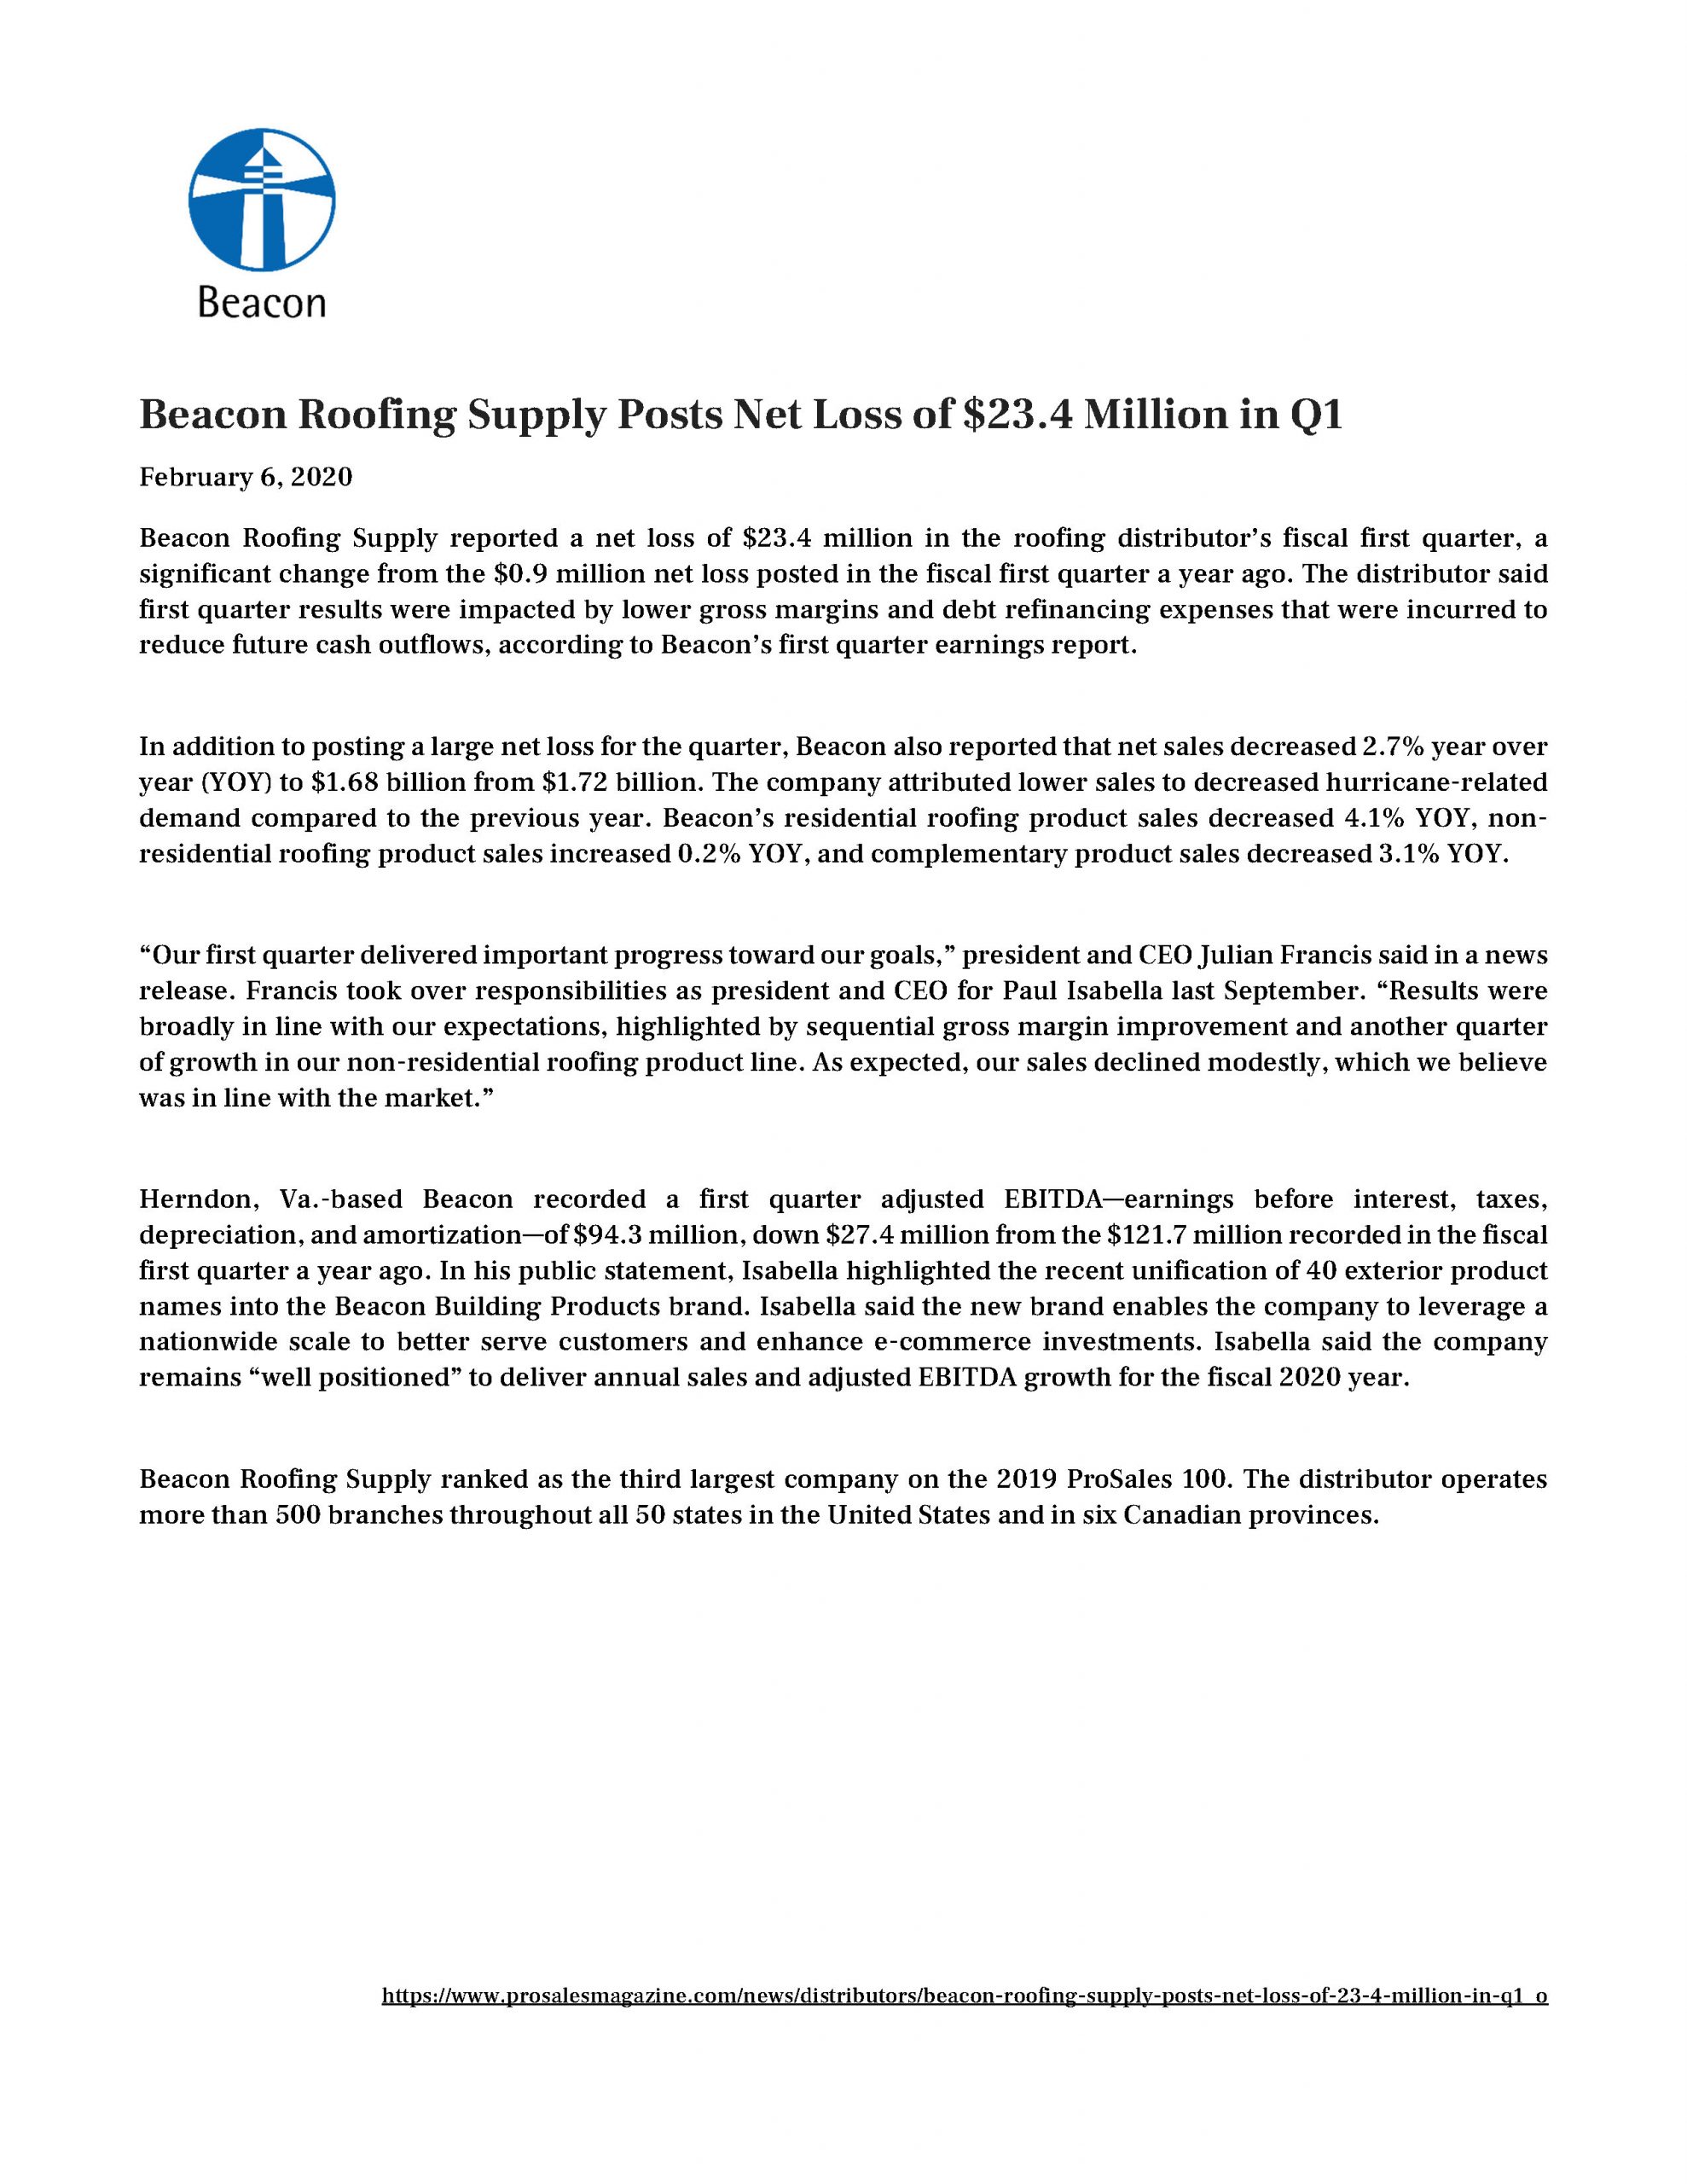 Beacon Roofing Supply Posts Net Loss of $23.4 Million in Q1 2.6.2020